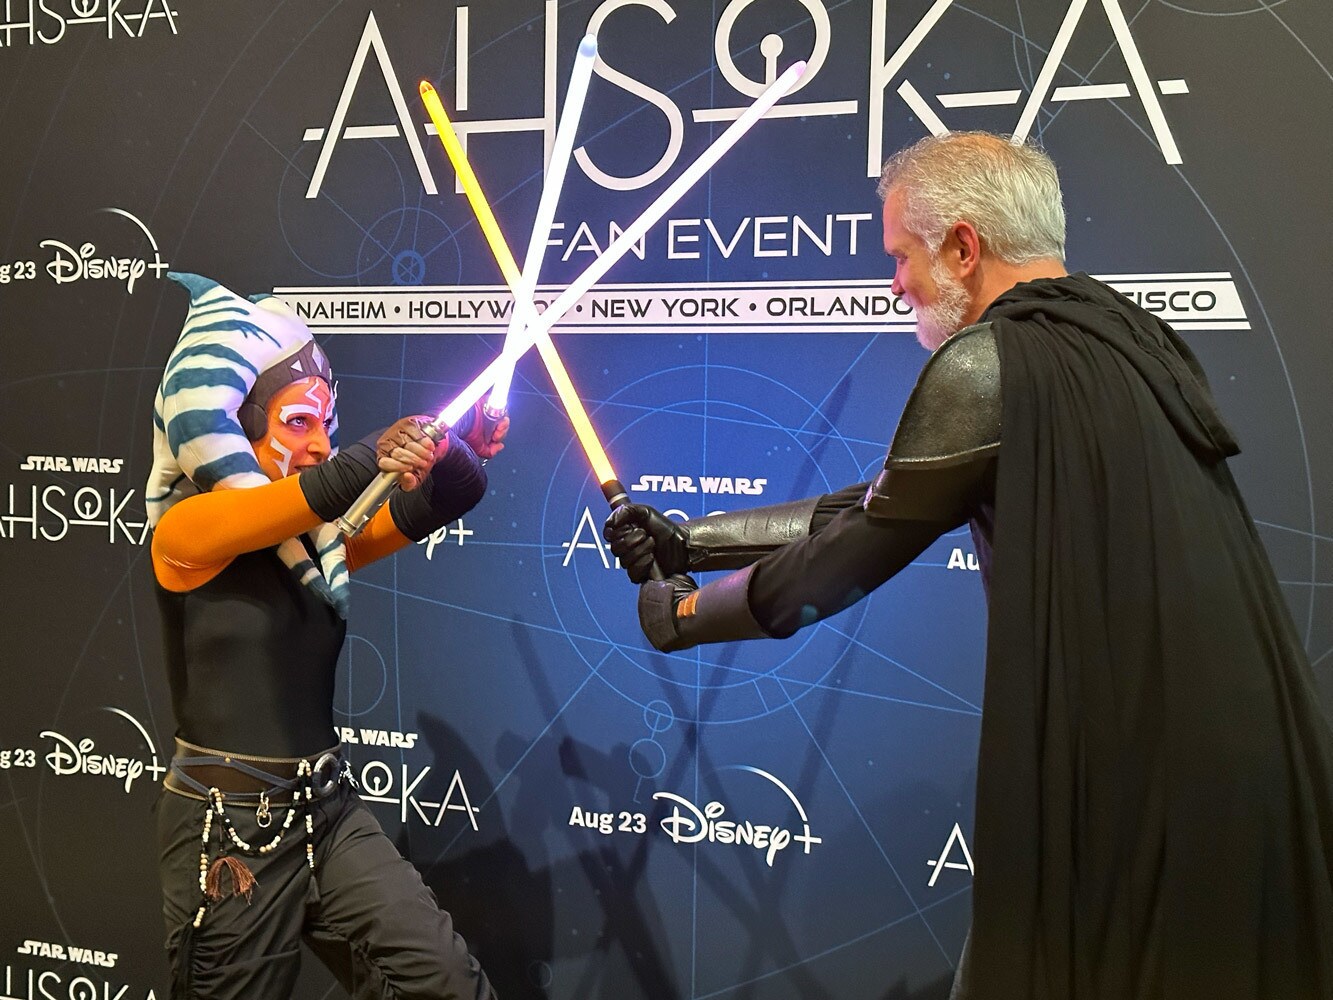 Two fans duel as Ahsoka Tano and Baylan Skoll.